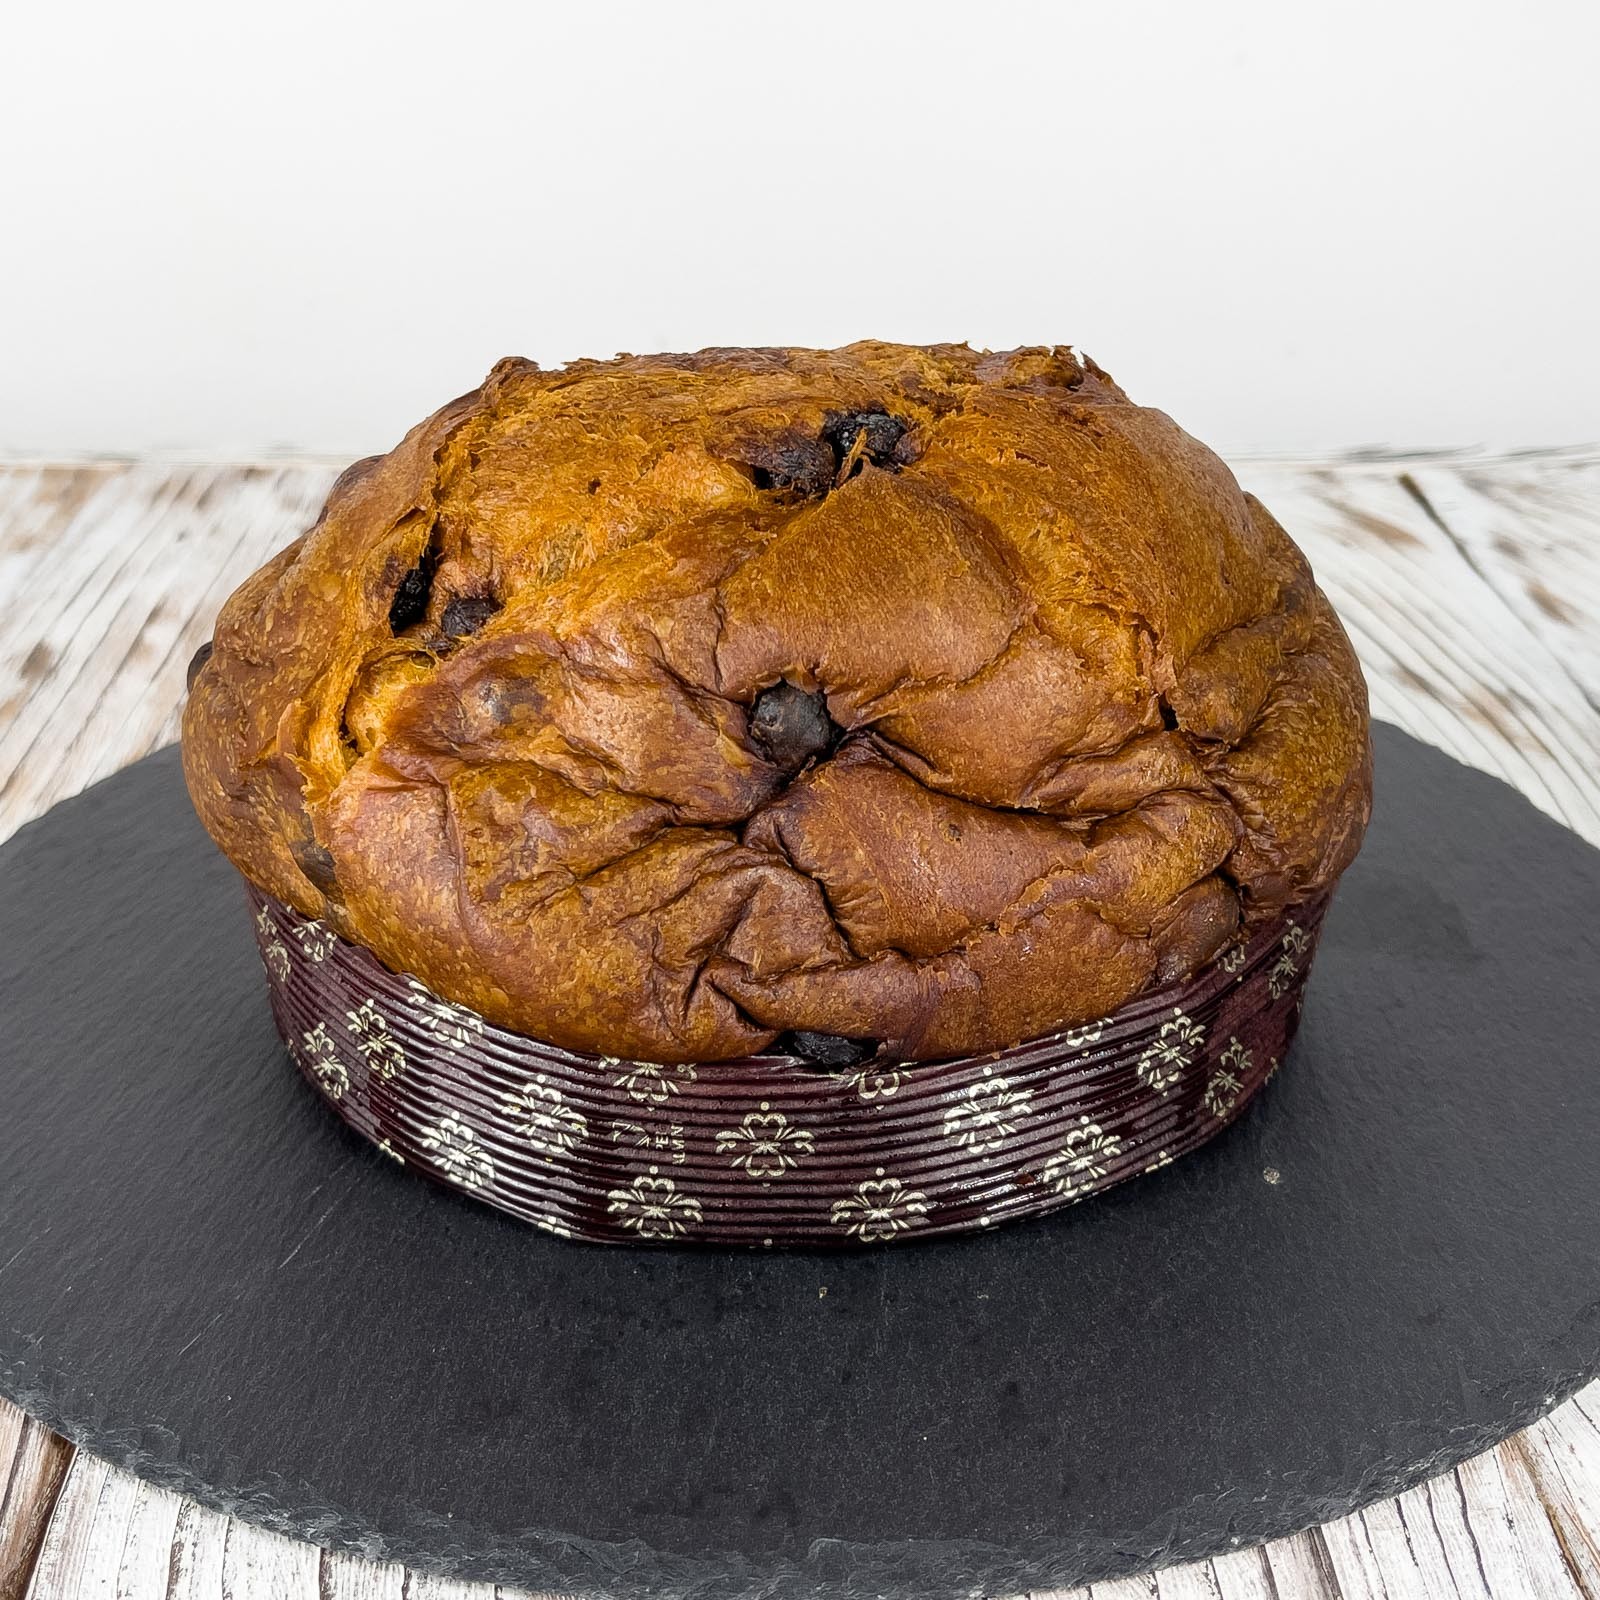 “Panzuppo” is a Tuscan dessert produced by the Fabio E Gianni pastry shop. Its shape, the slow natural leavening and the presence of raisins make it similar to the milanese panettone, but the main difference lies in the wetting inside, made up of water, sugar and fortified wine which gives it its characteristic aroma and flavor.